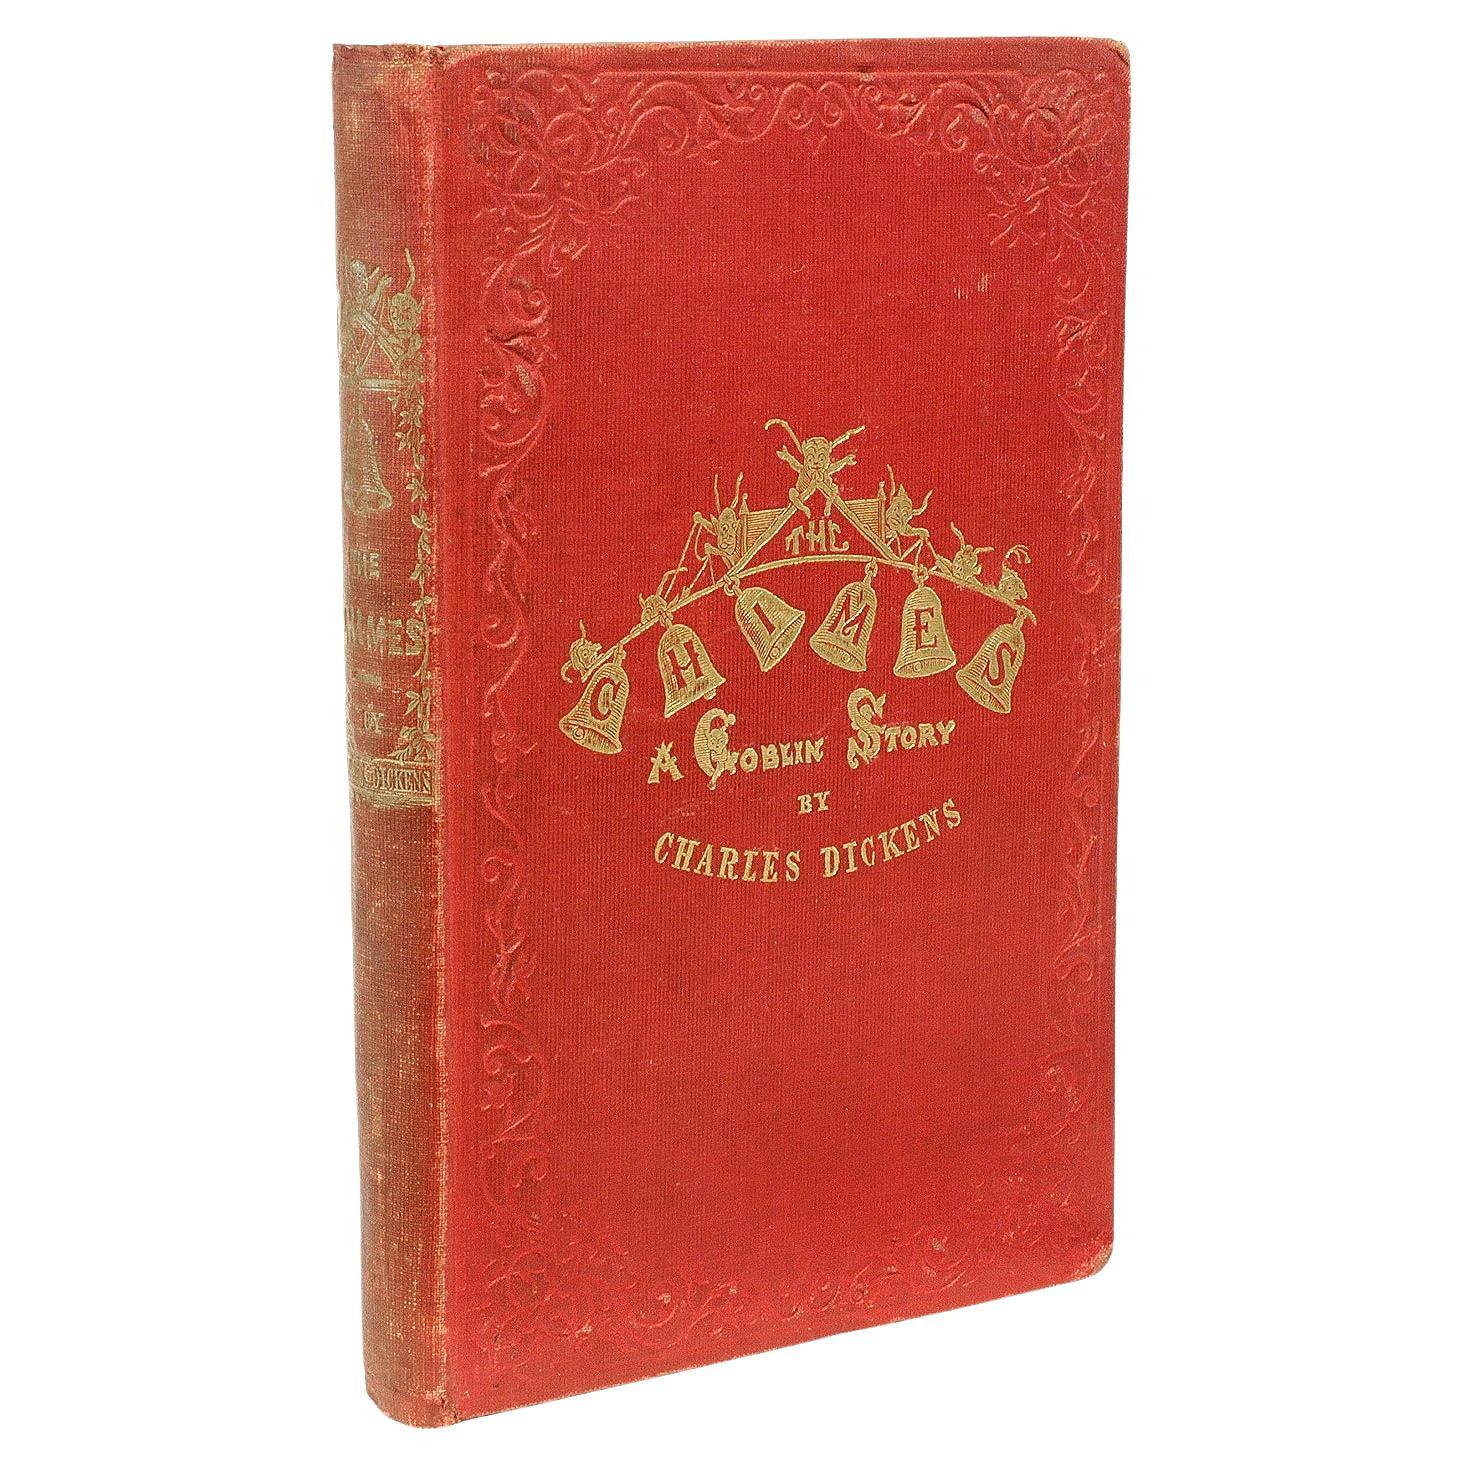 Charles DICKENS - The Chimes: A Goblin Story - 1845 - FIRST EDITION For Sale